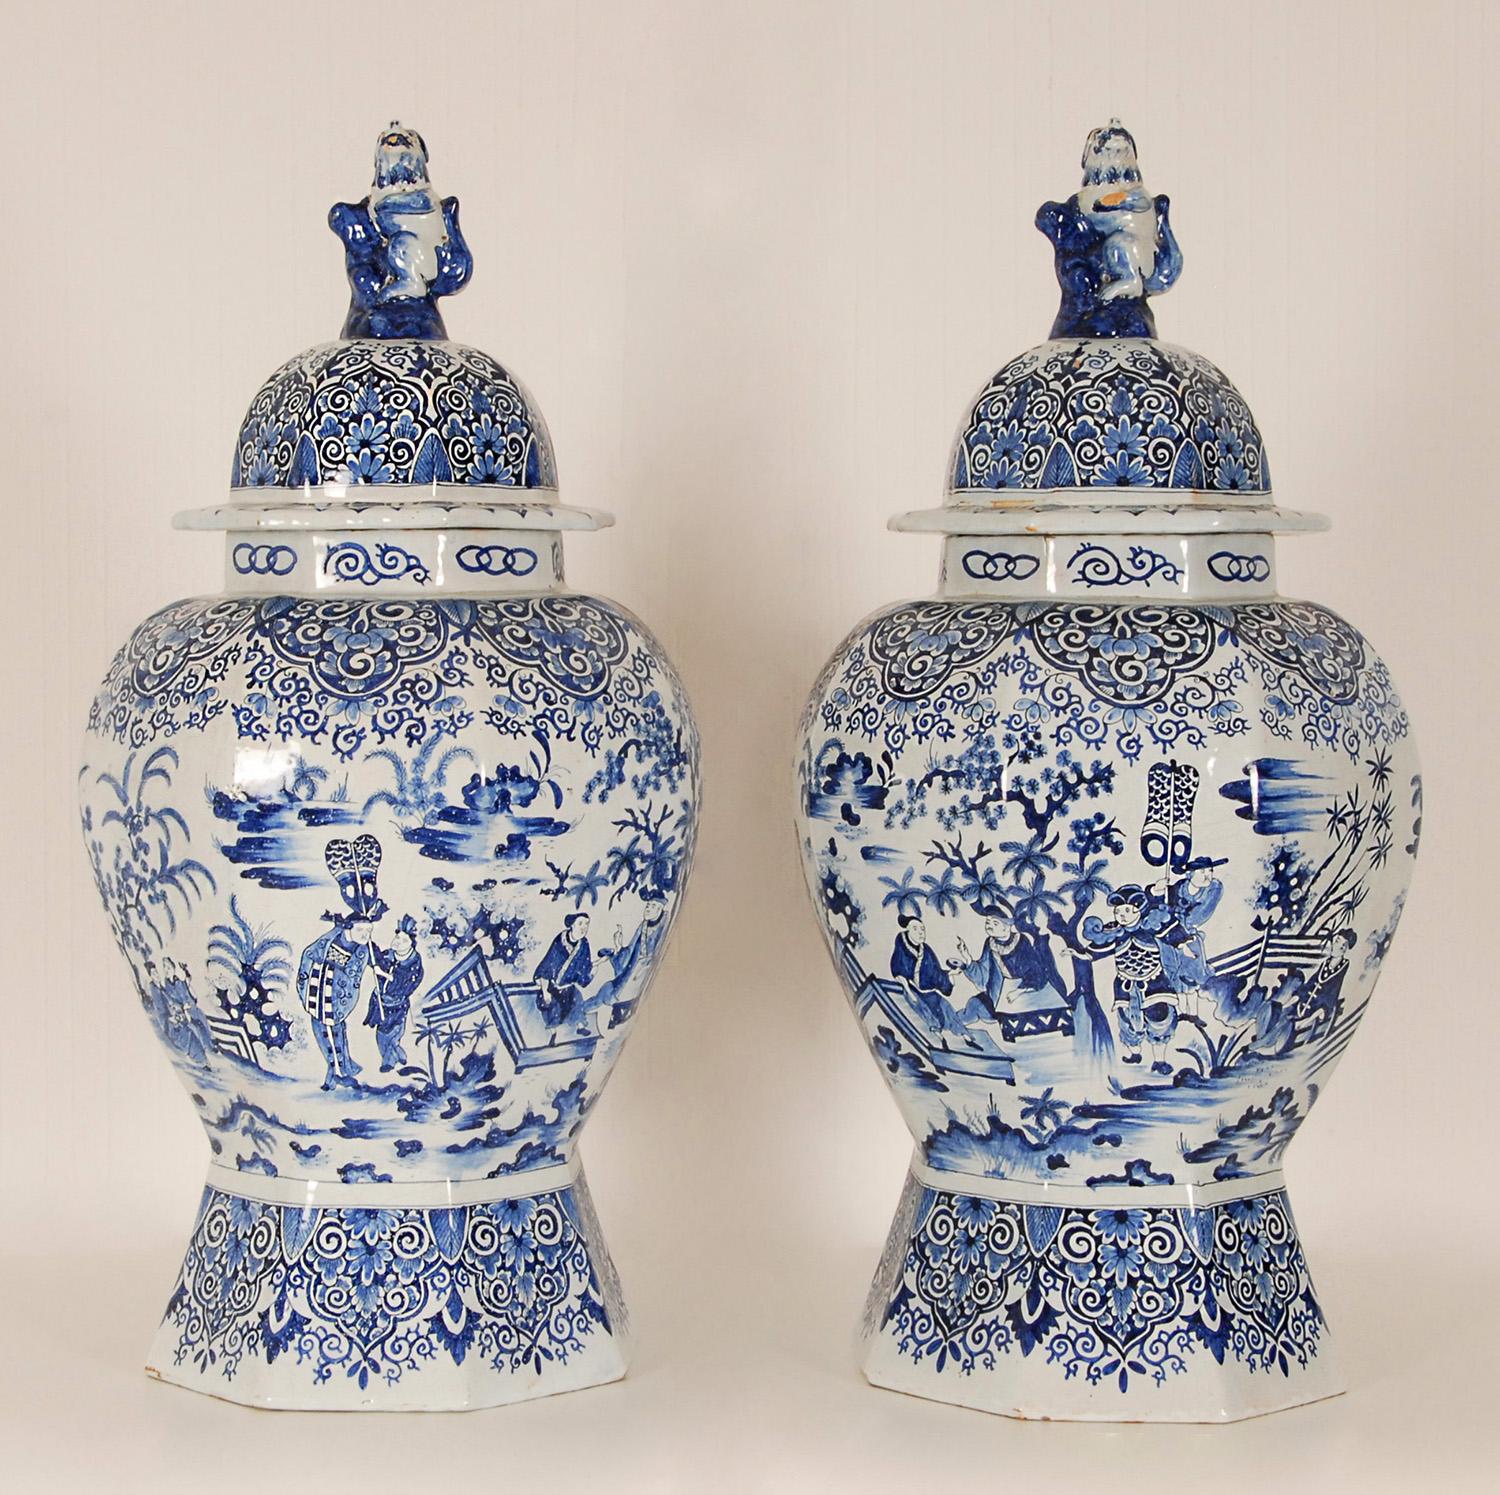 Baroque Revival Delft Vases 17th century Style Earthenware Blue White Tall Baluster Vases a pair